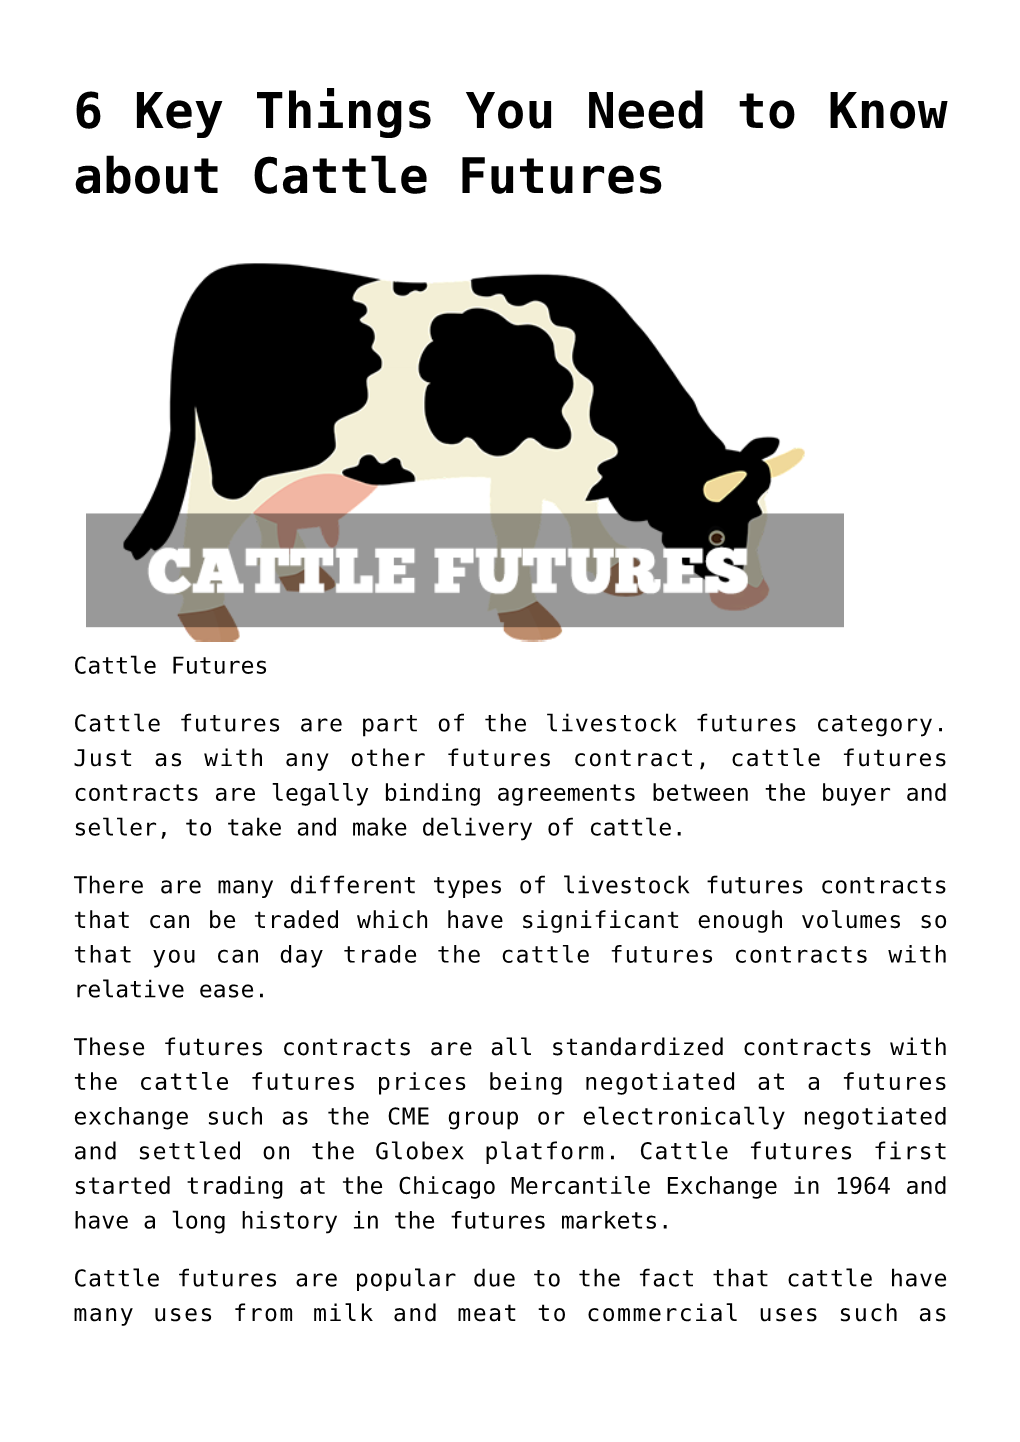 How Are Cattle Futures Contracts Priced? 4